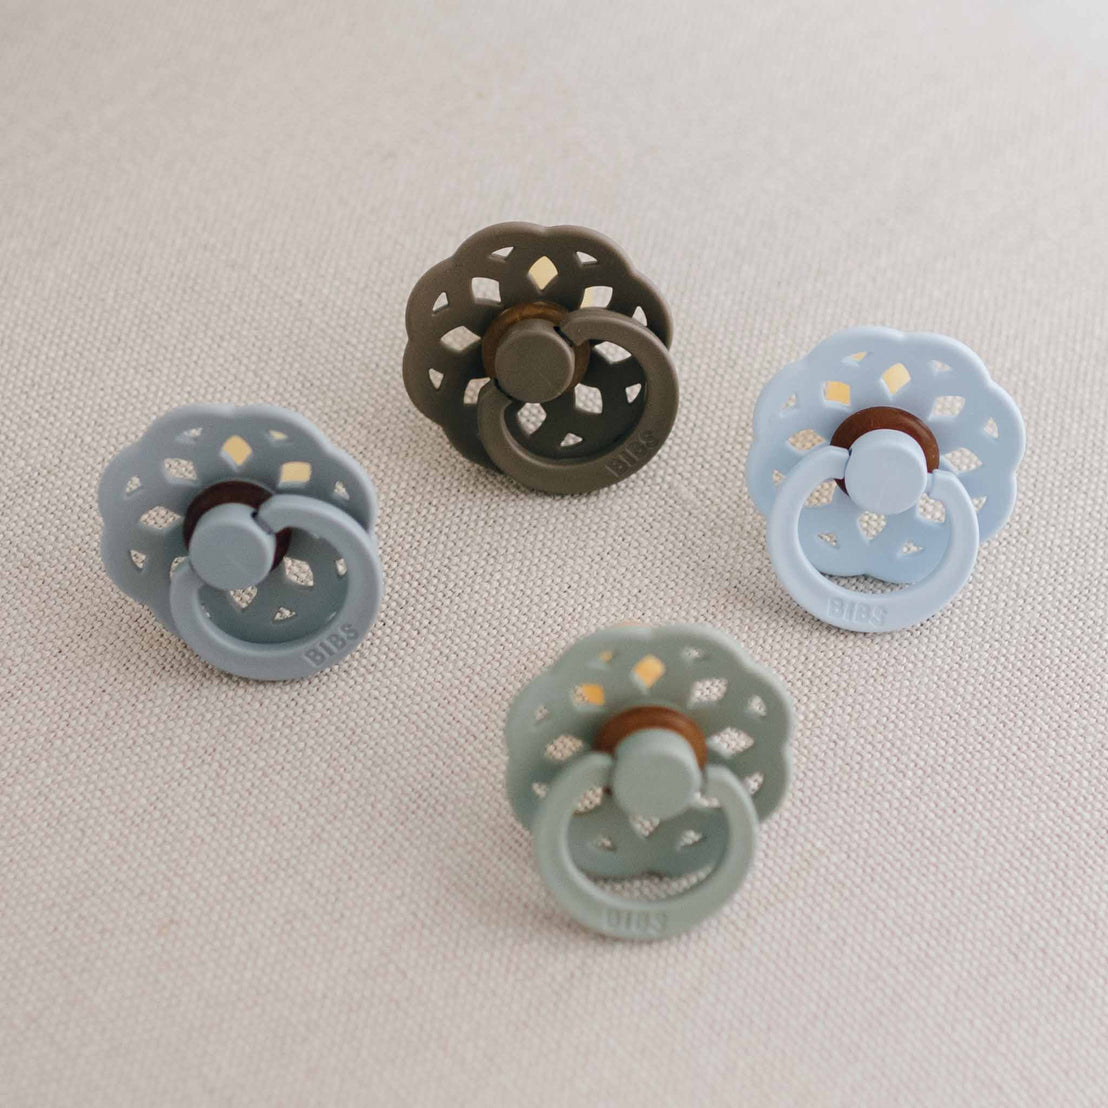 Five Bibs Lace Pacifiers, each with bohemian inspired designs and colors, arranged in a circle on a light beige fabric.